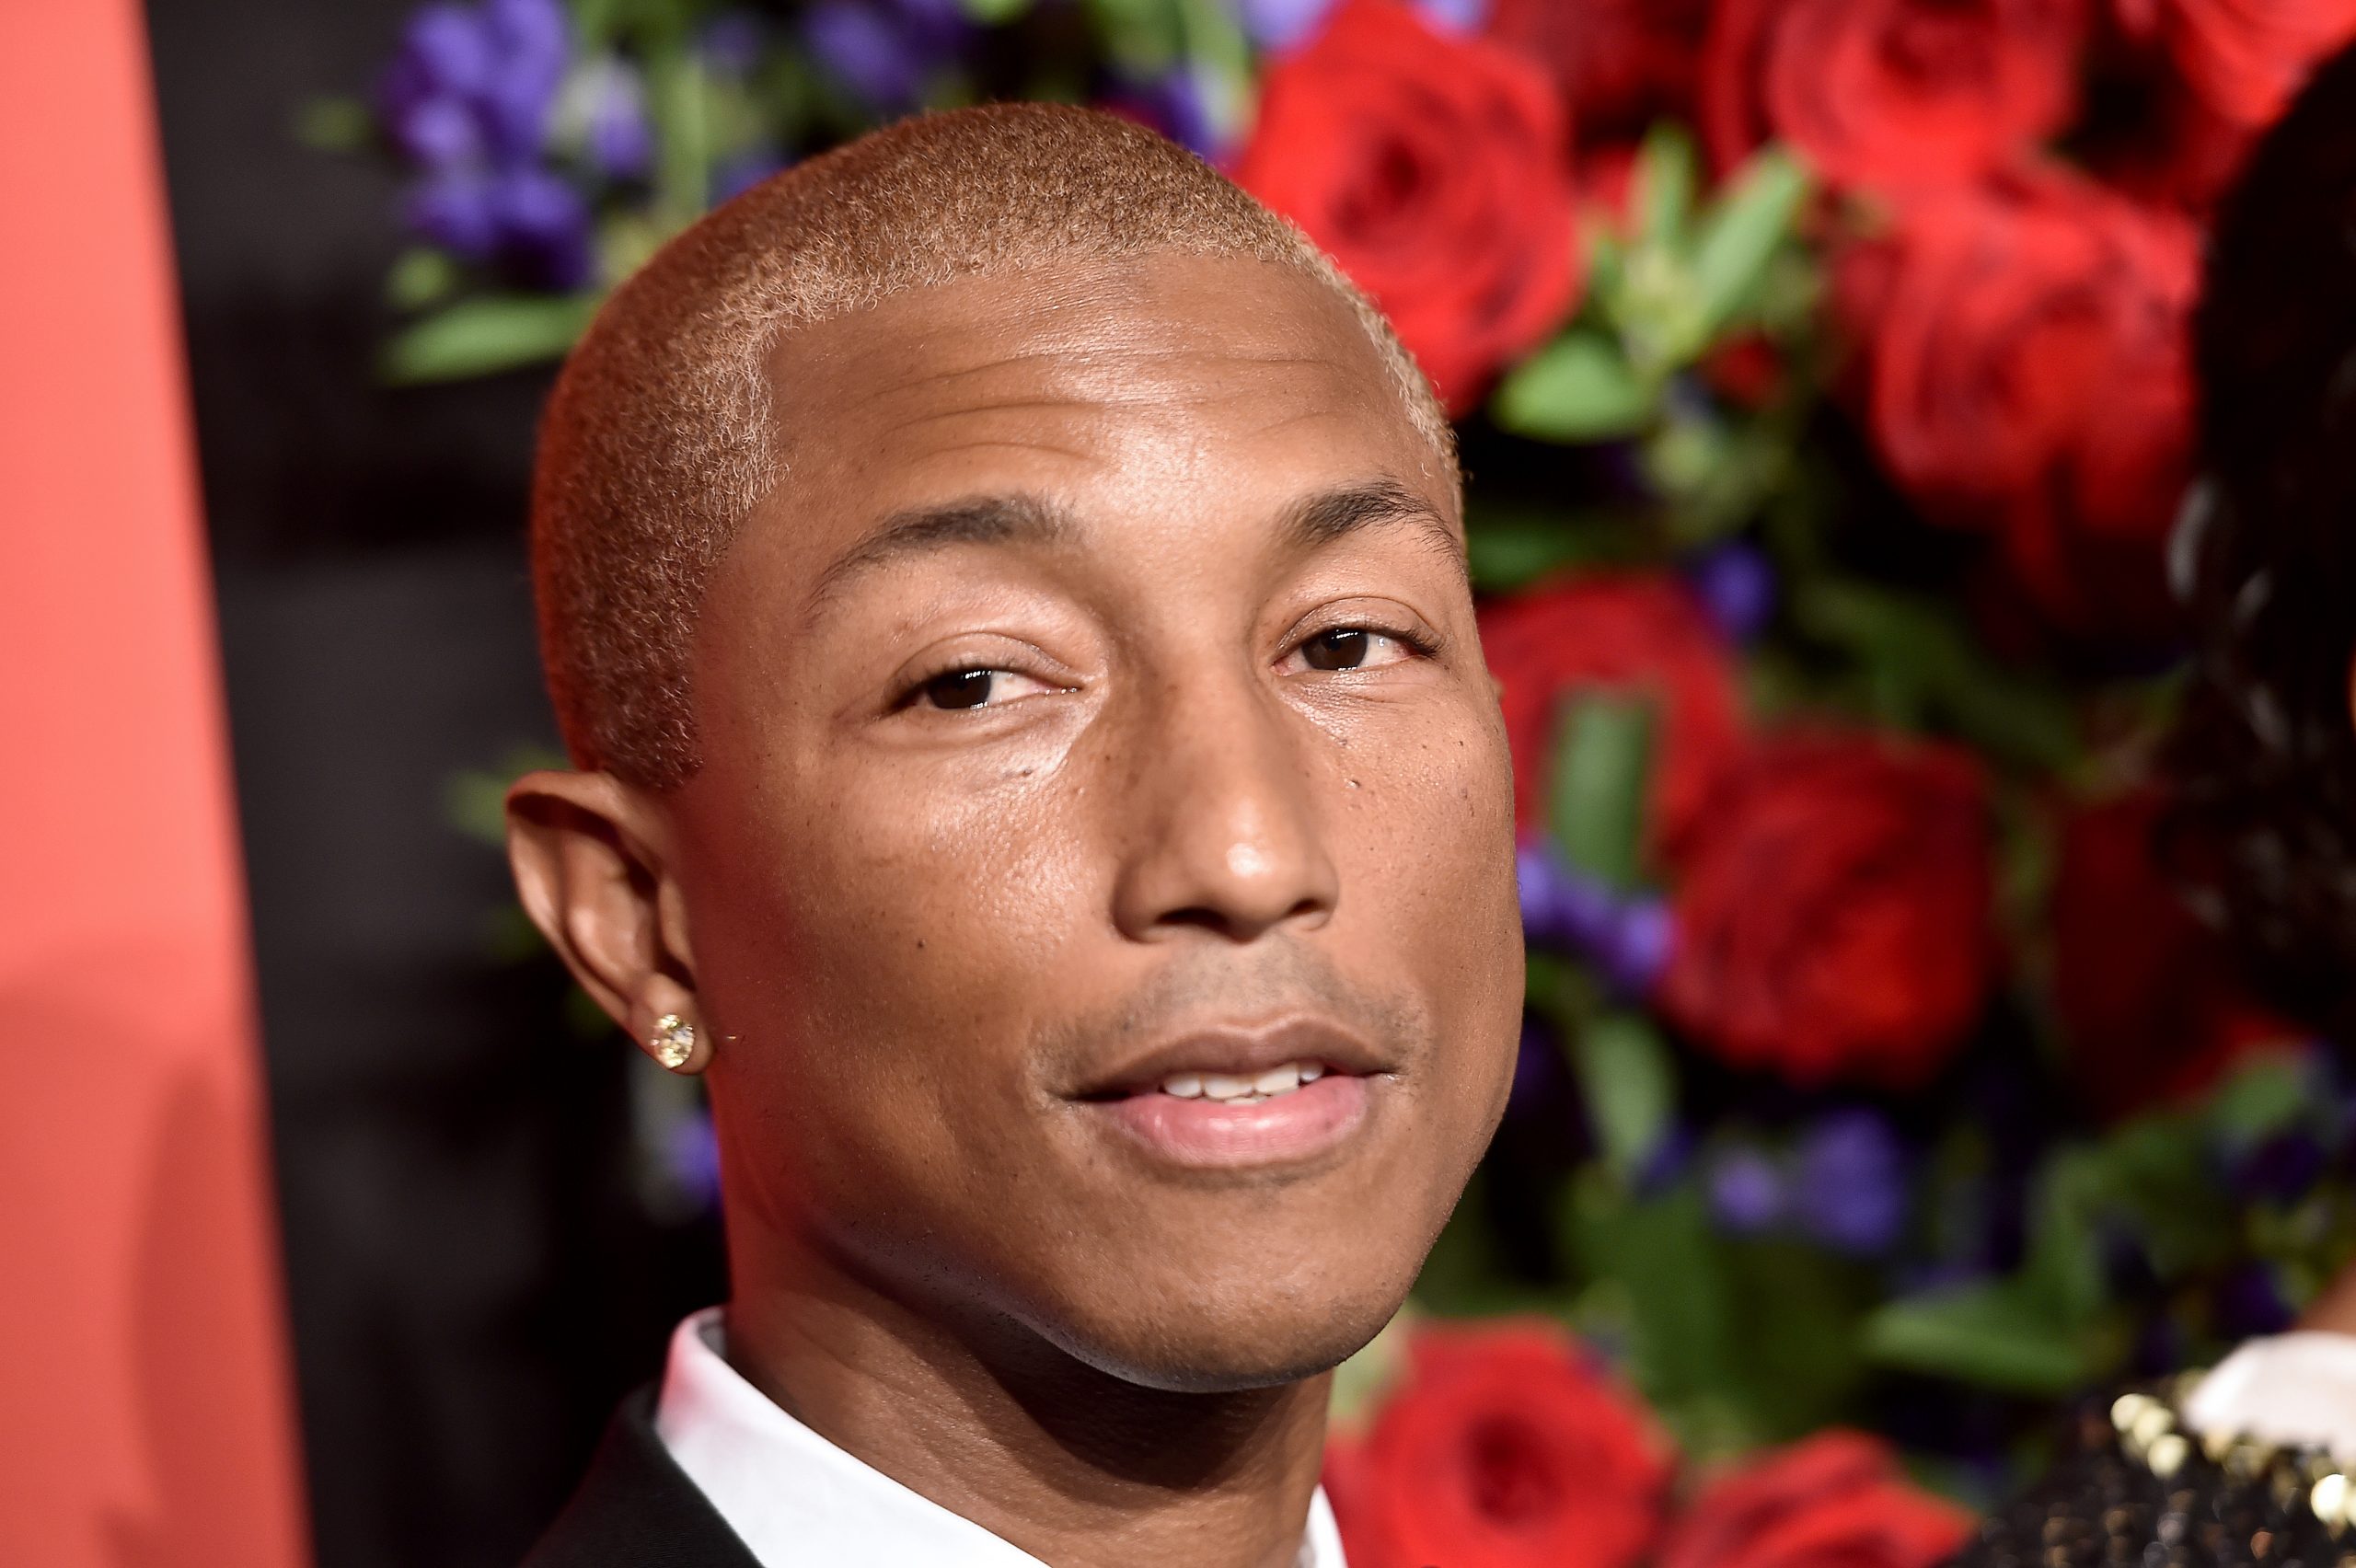 Pharrell Williams Will Open Private Schools For Students From Low-Income Families